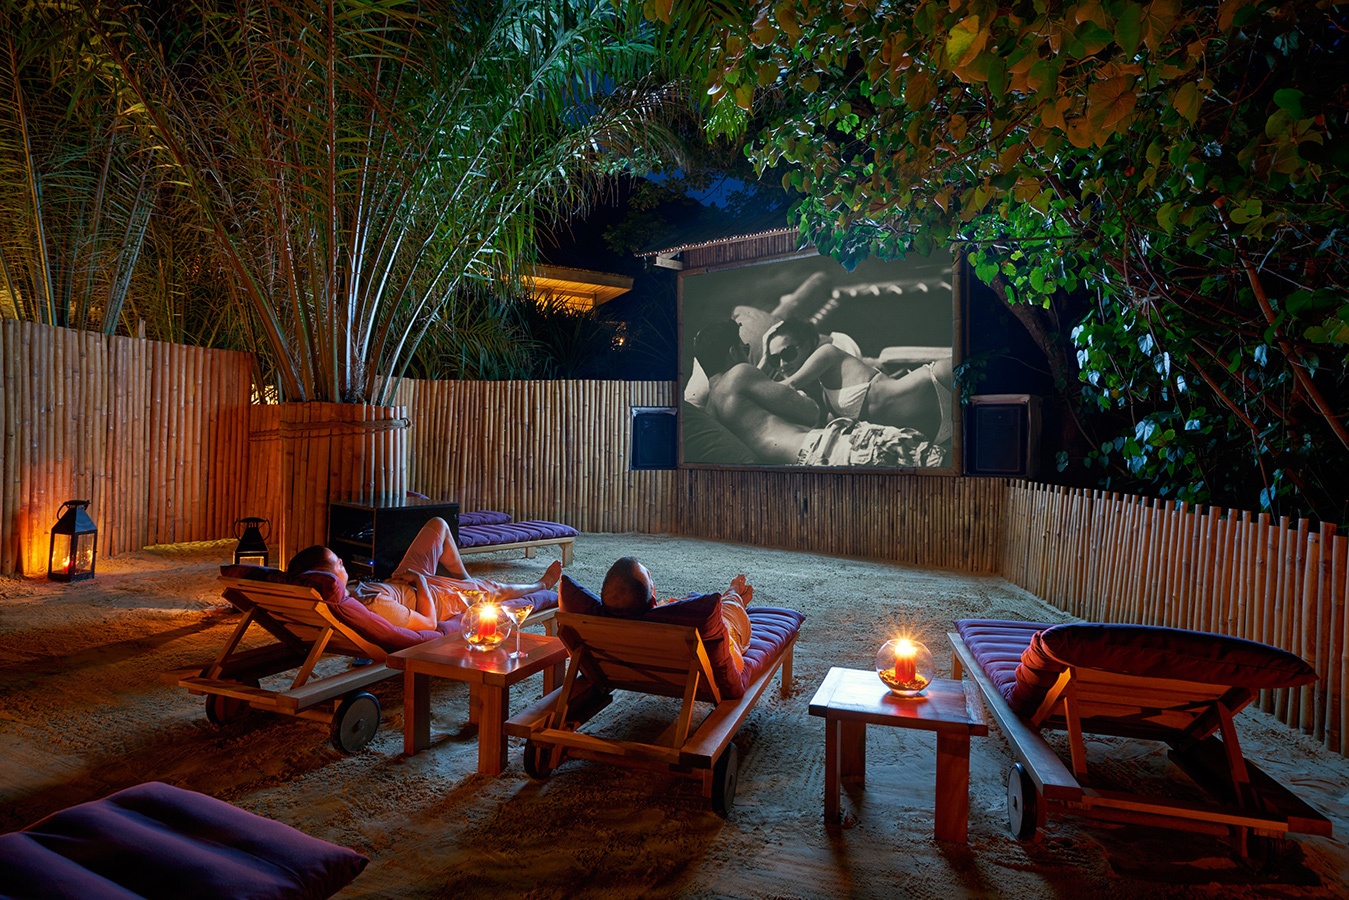 Watching movies outdoors in Jungle Cinema at Six Senses Con Dao